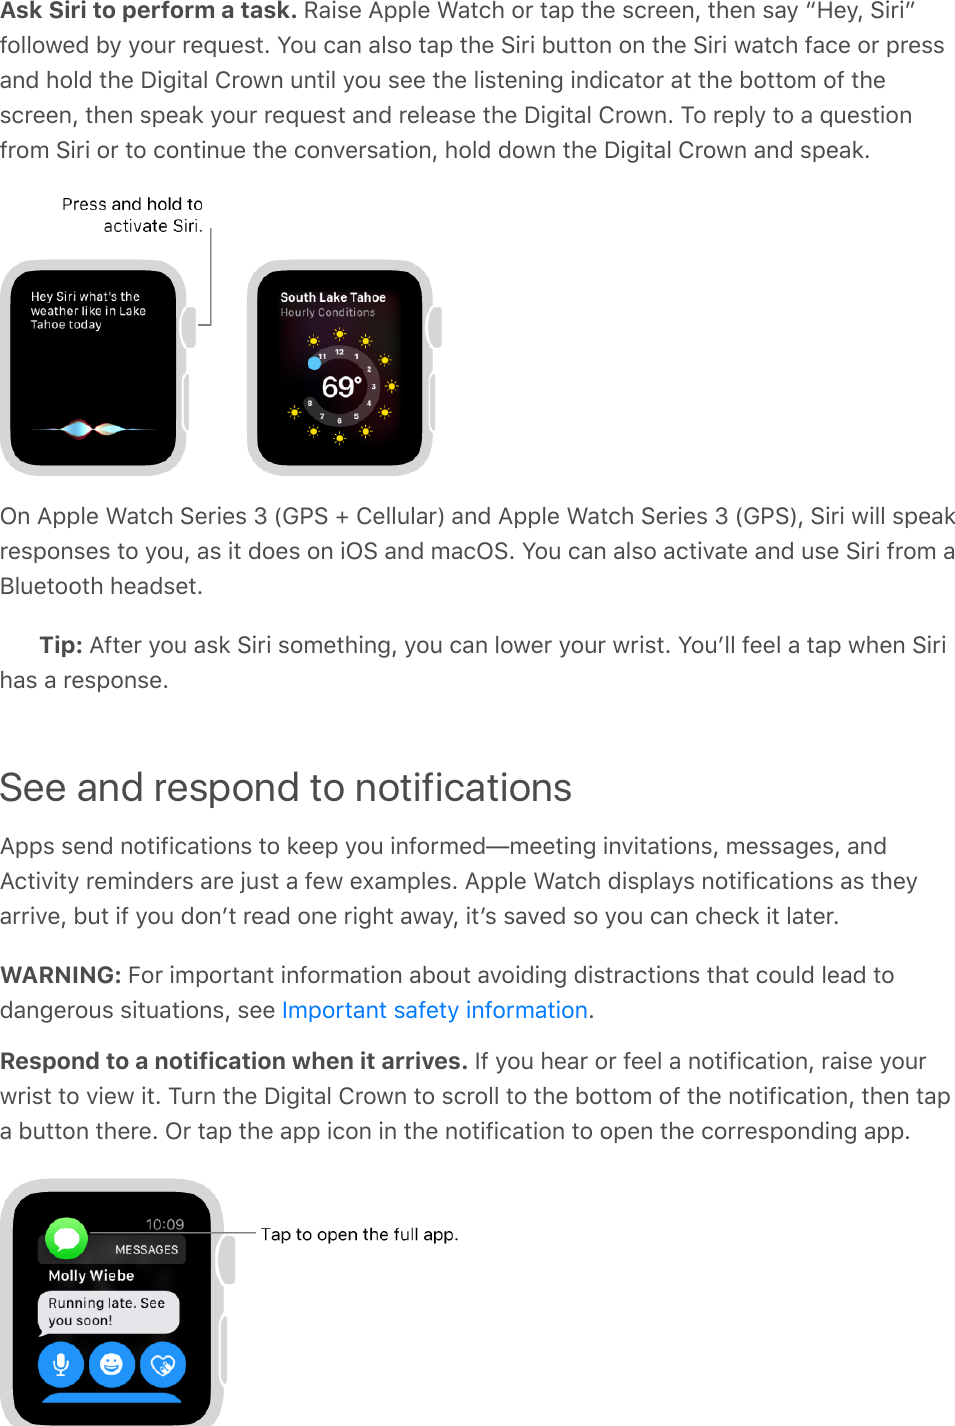 Ask Siri to perform a task. Raise Apple Watch or tap the screen, then say “Hey, Siri”followed by your request. You can also tap the Siri button on the Siri watch face or pressand hold the Digital Crown until you see the listening indicator at the bottom of thescreen, then speak your request and release the Digital Crown. To reply to a questionfrom Siri or to continue the conversation, hold down the Digital Crown and speak.On Apple Watch Series 3 (GPS + Cellular) and Apple Watch Series 3 (GPS), Siri will speakresponses to you, as it does on iOS and macOS. You can also activate and use Siri from aBluetooth headset.Tip: After you ask Siri something, you can lower your wrist. Youʼll feel a tap when Sirihas a response.See and respond to notificationsApps send notifications to keep you informed—meeting invitations, messages, andActivity reminders are just a few examples. Apple Watch displays notifications as theyarrive, but if you donʼt read one right away, itʼs saved so you can check it later.WARNING: For important information about avoiding distractions that could lead todangerous situations, see  .Respond to a notification when it arrives. If you hear or feel a notification, raise yourwrist to view it. Turn the Digital Crown to scroll to the bottom of the notification, then tapa button there. Or tap the app icon in the notification to open the corresponding app.Important safety information